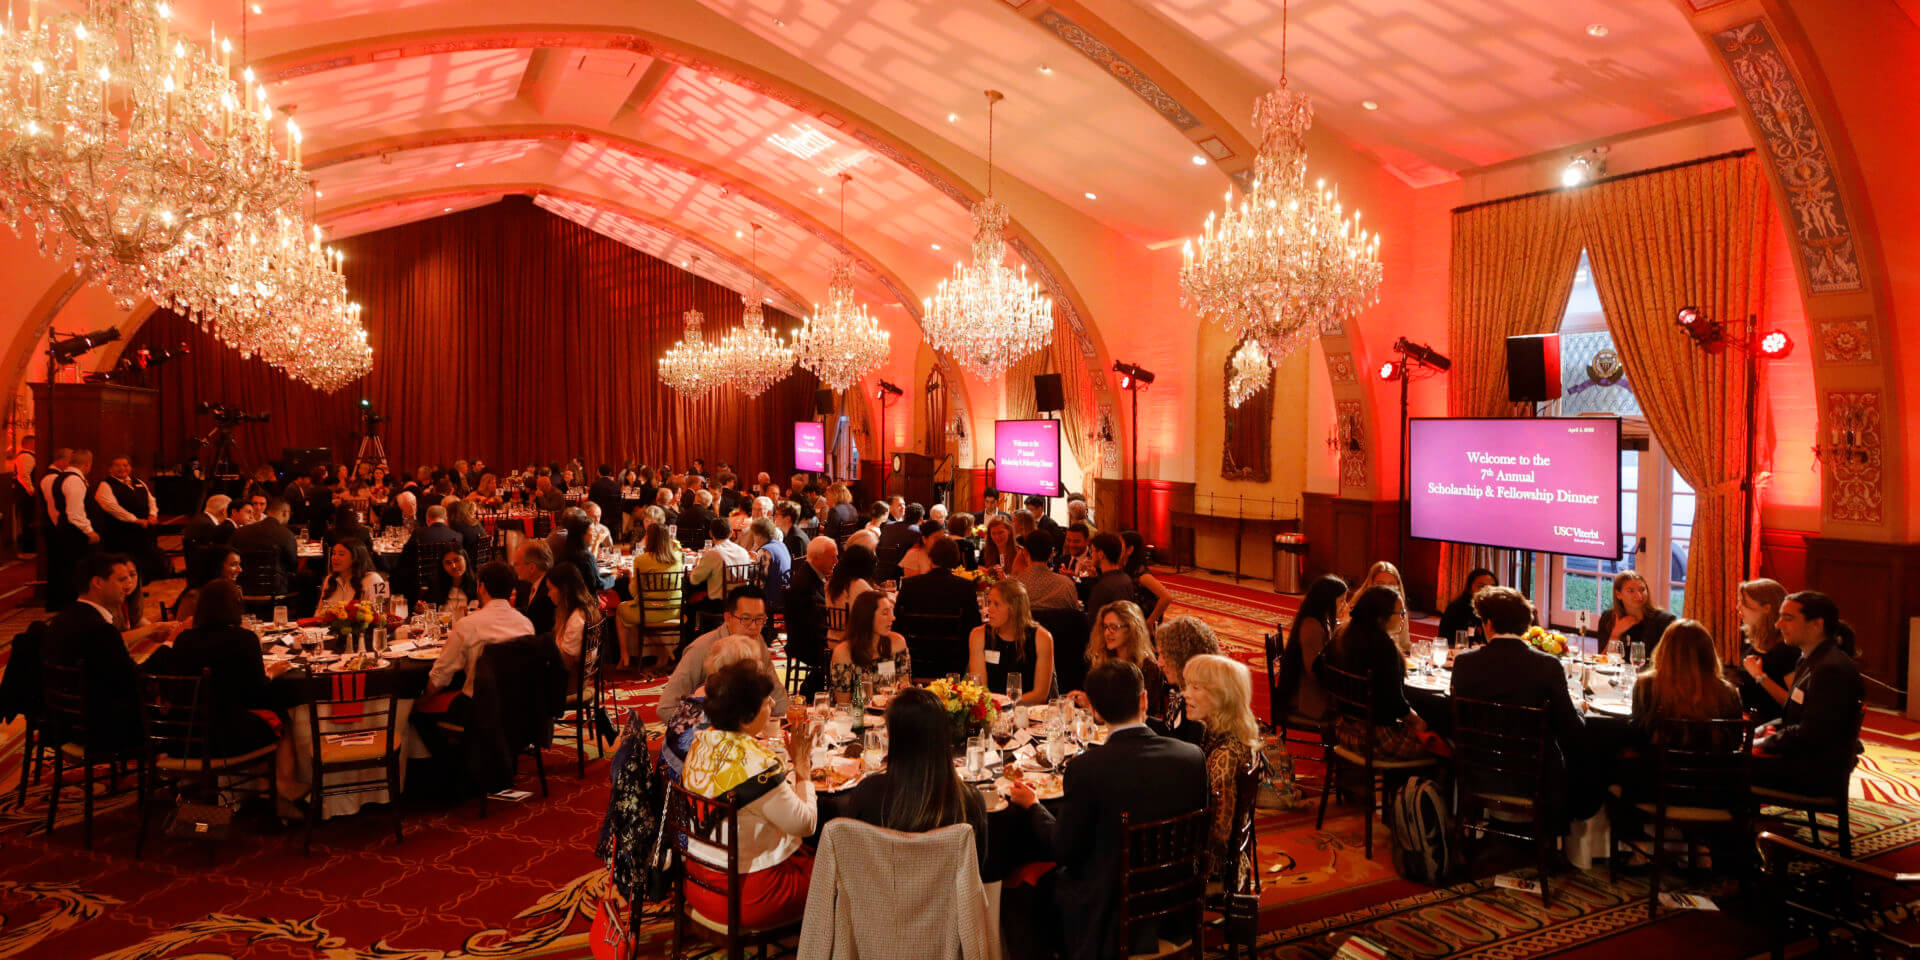 USC Viterbi held its 7th Annual Scholarship and Fellowship Dinner on April 5 at Town & Gown. (Photo Credit: Steve Cohn)